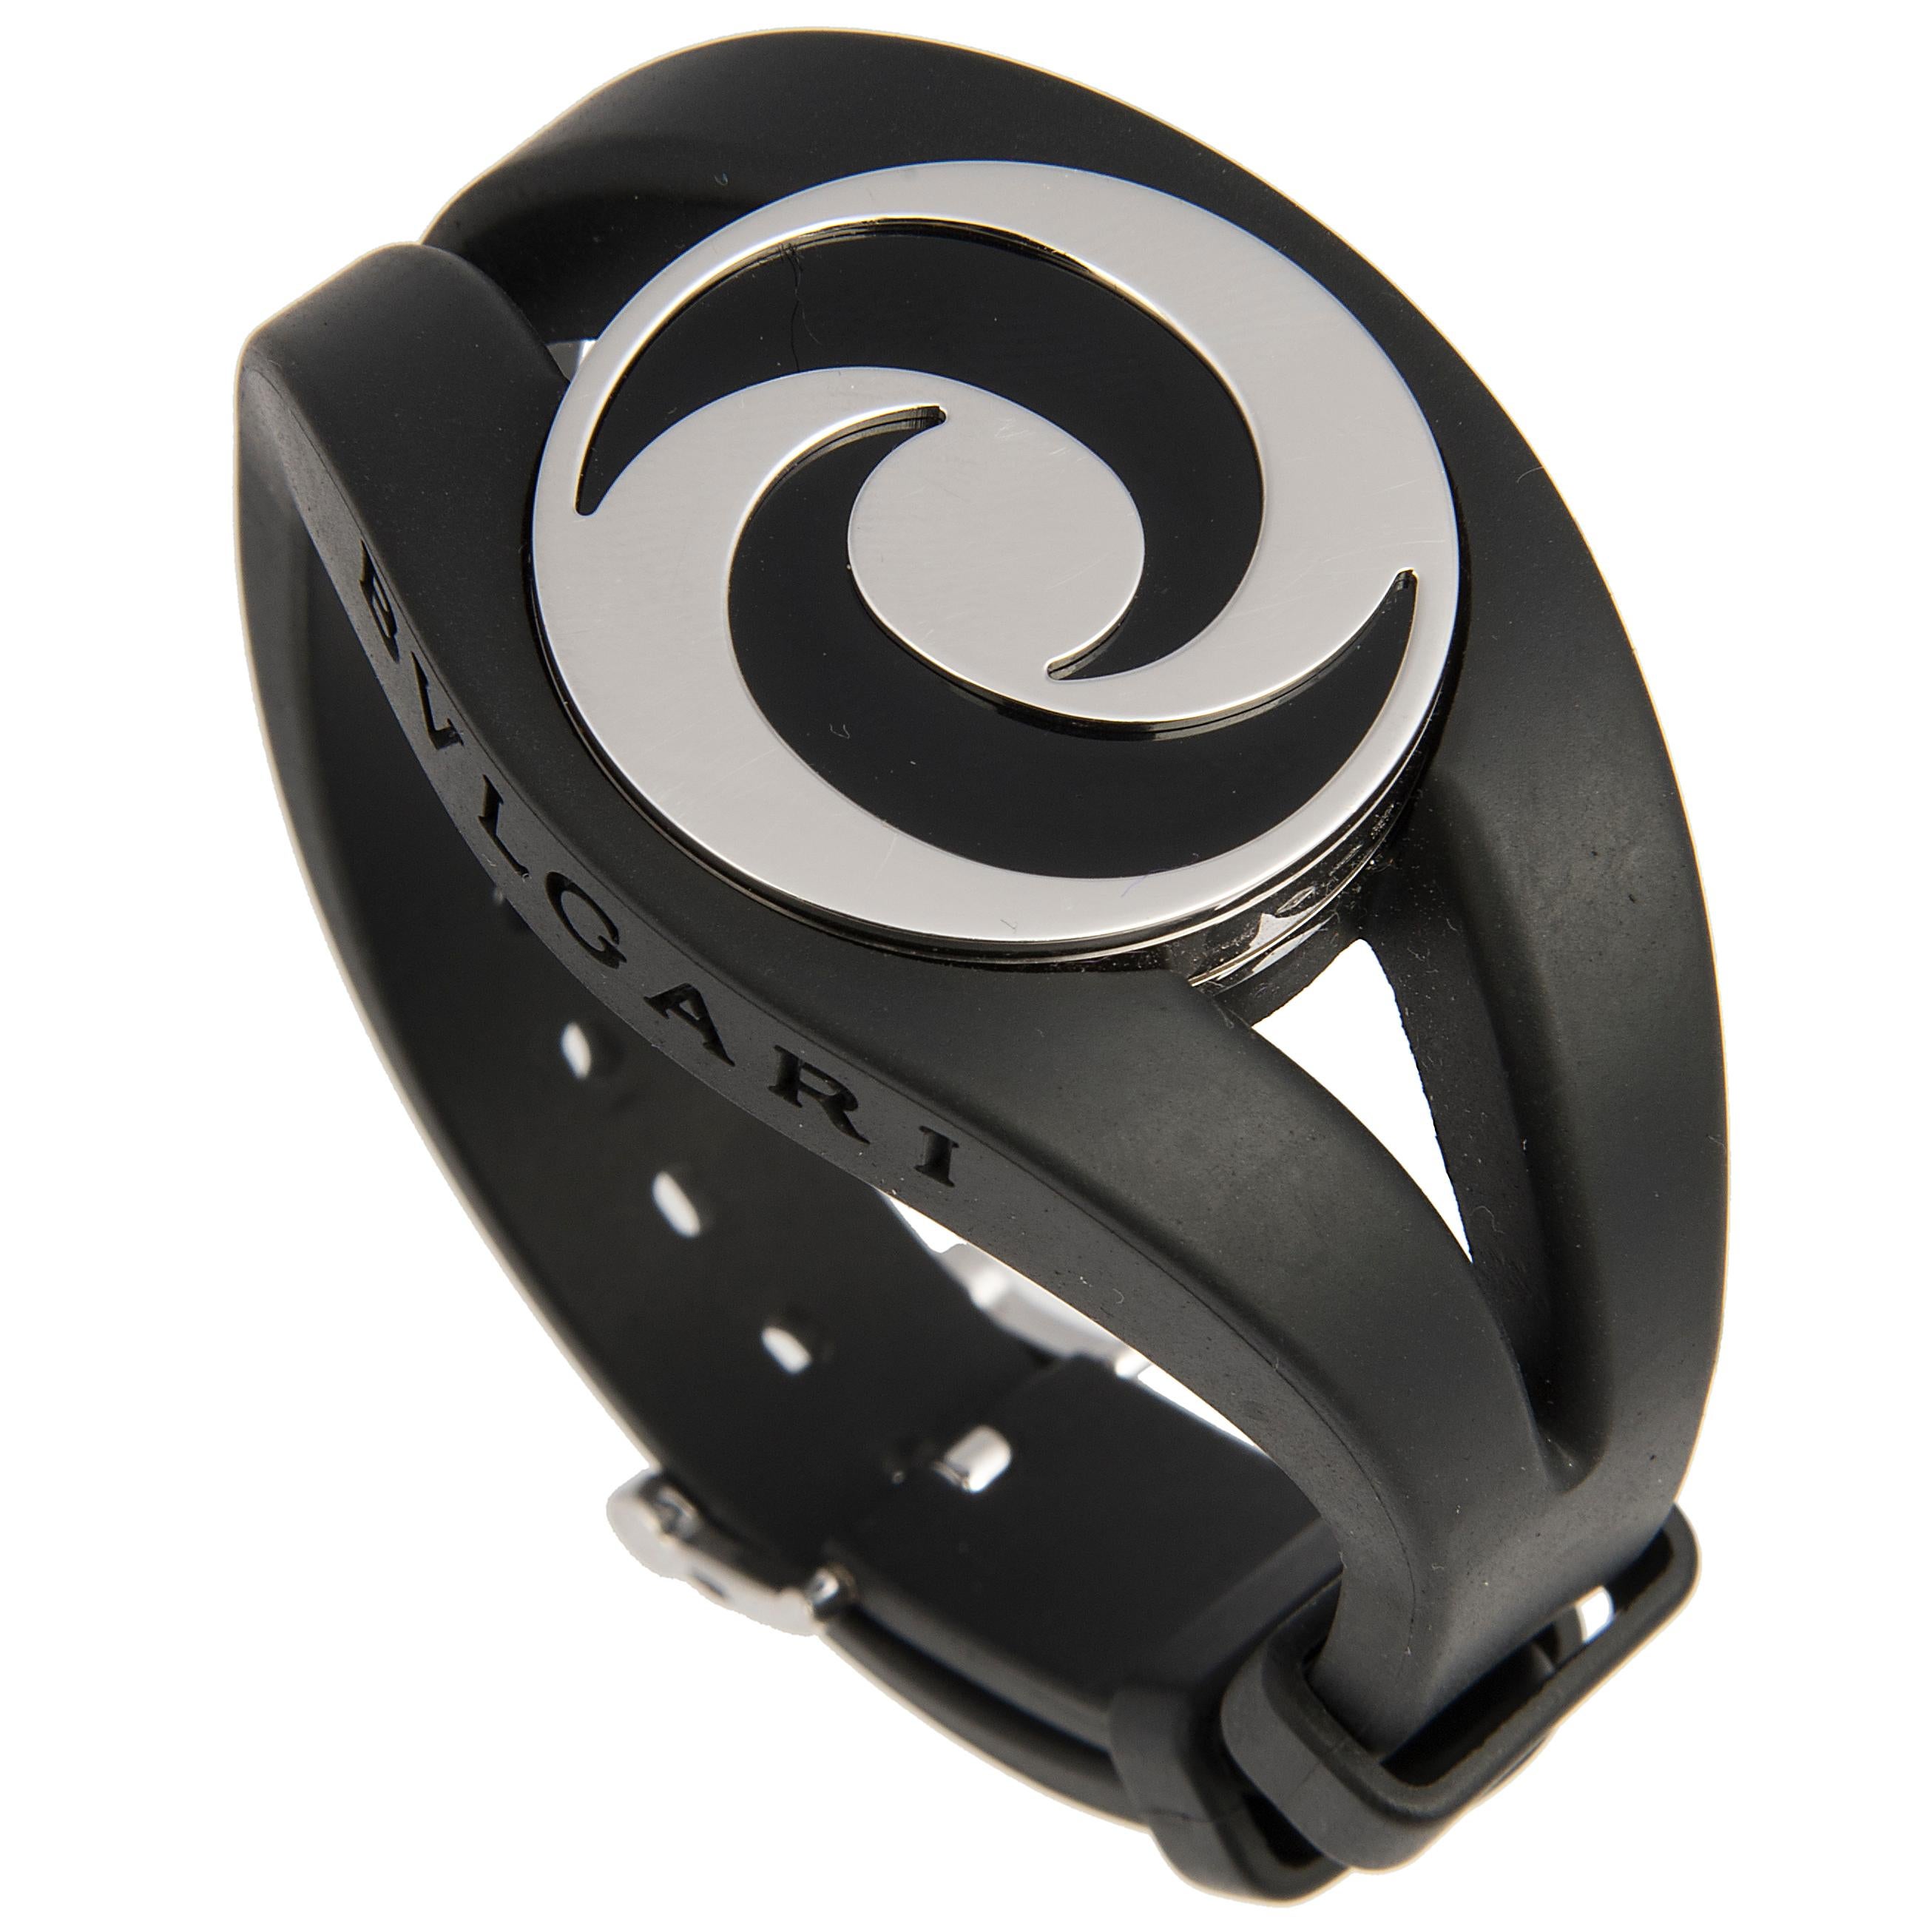 Bulgari 18 Karat White Gold and Onyx Optical Illusion Spinning Ring and Bracelet In Good Condition For Sale In London, GB